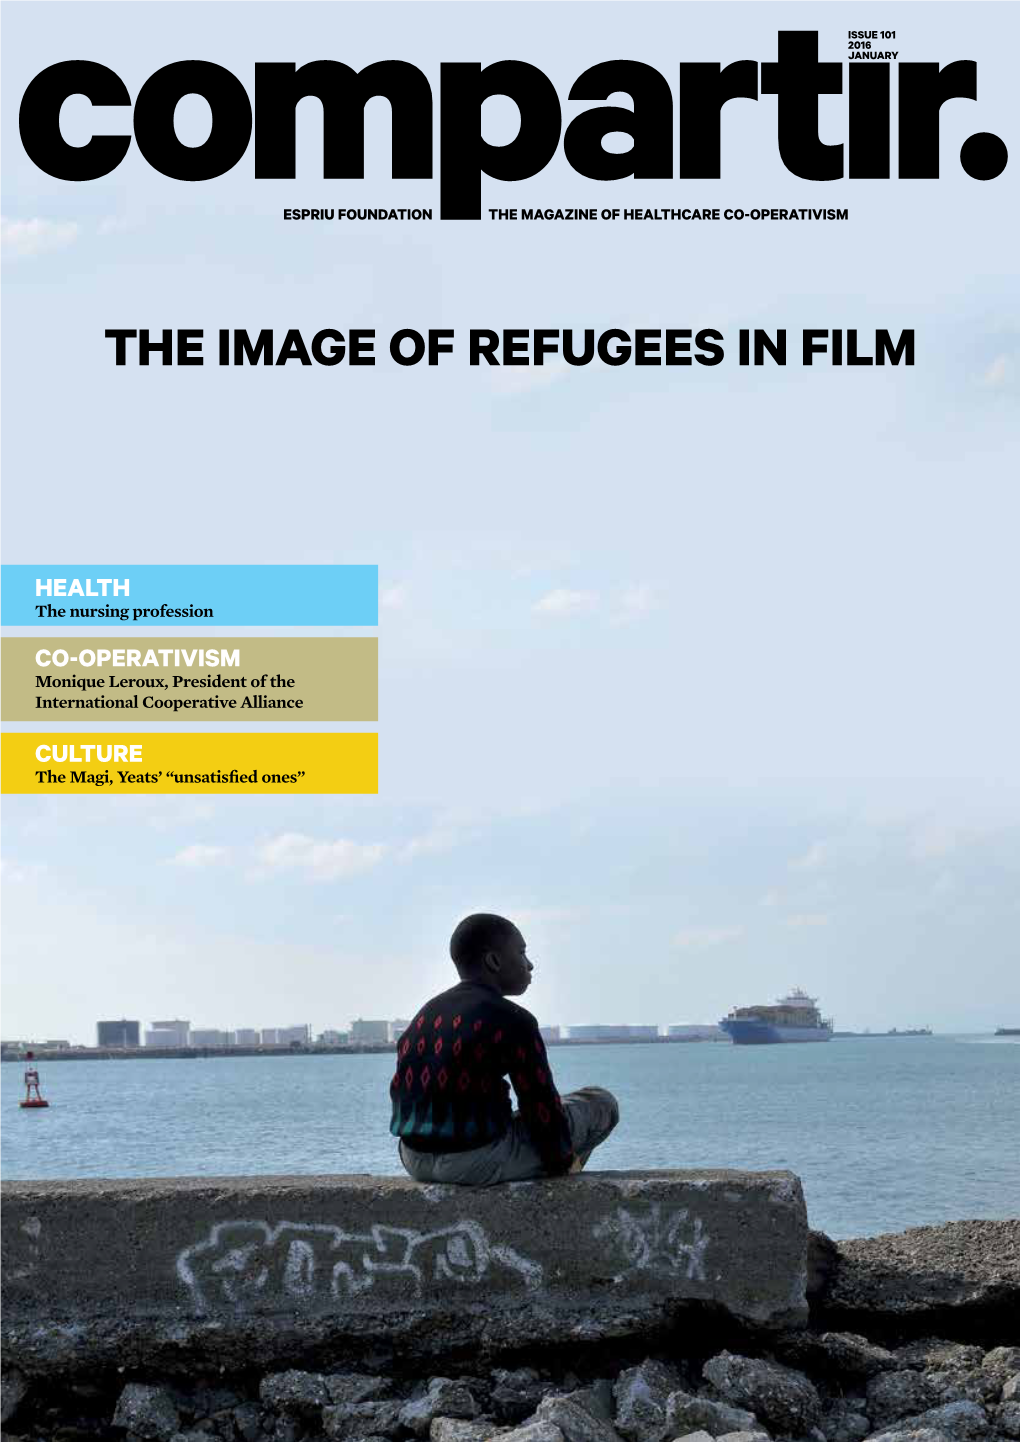 The Image of Refugees in Film